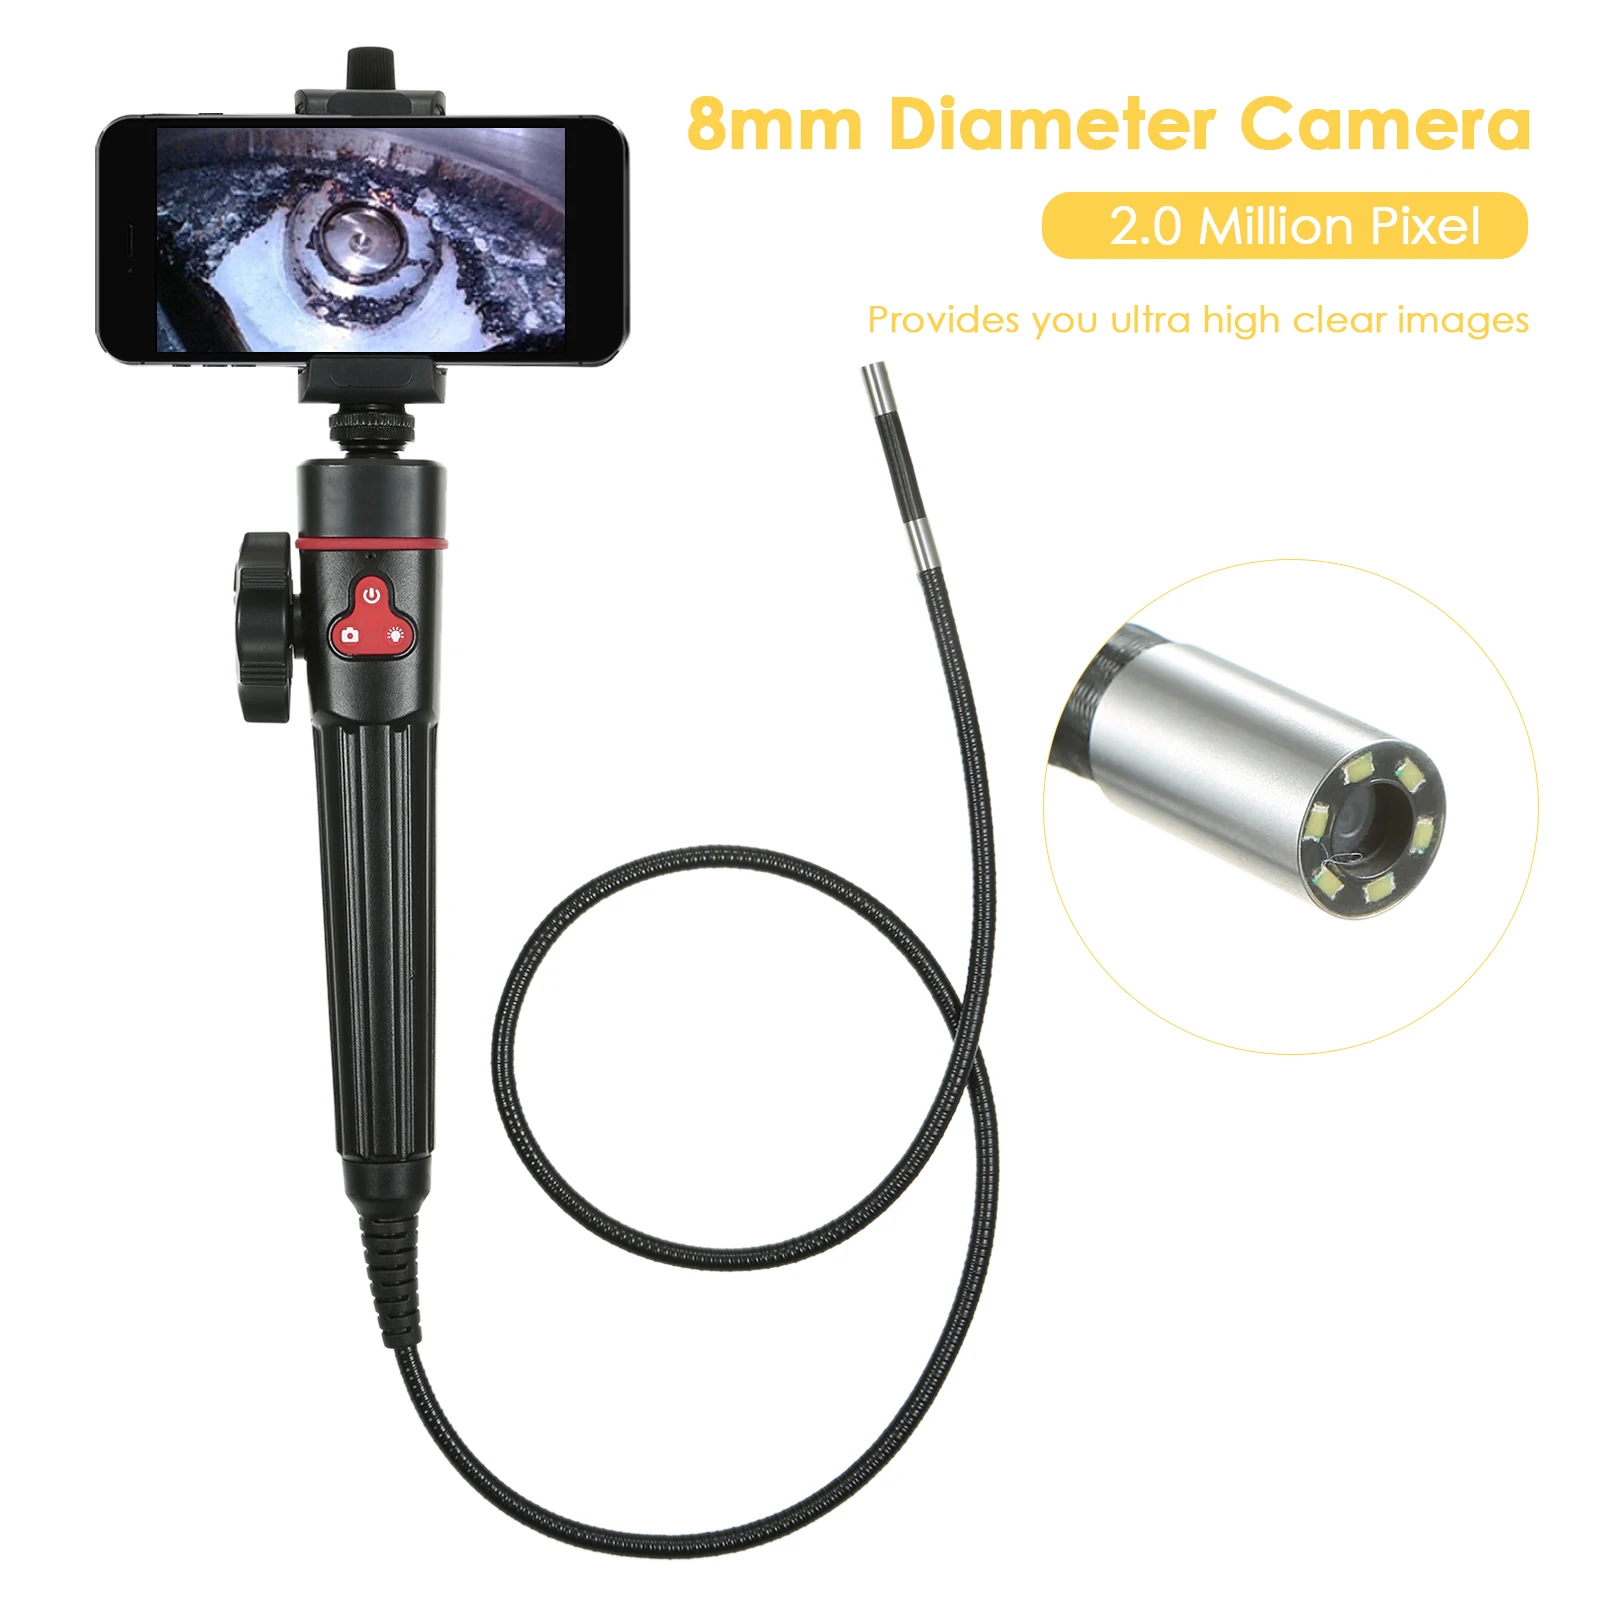 

2-Way 180° Steering Angle Industrial En-doscope Rechargeable Wi-Fi Transmission 2.0 Million Pixel Borescope Camera Replacement